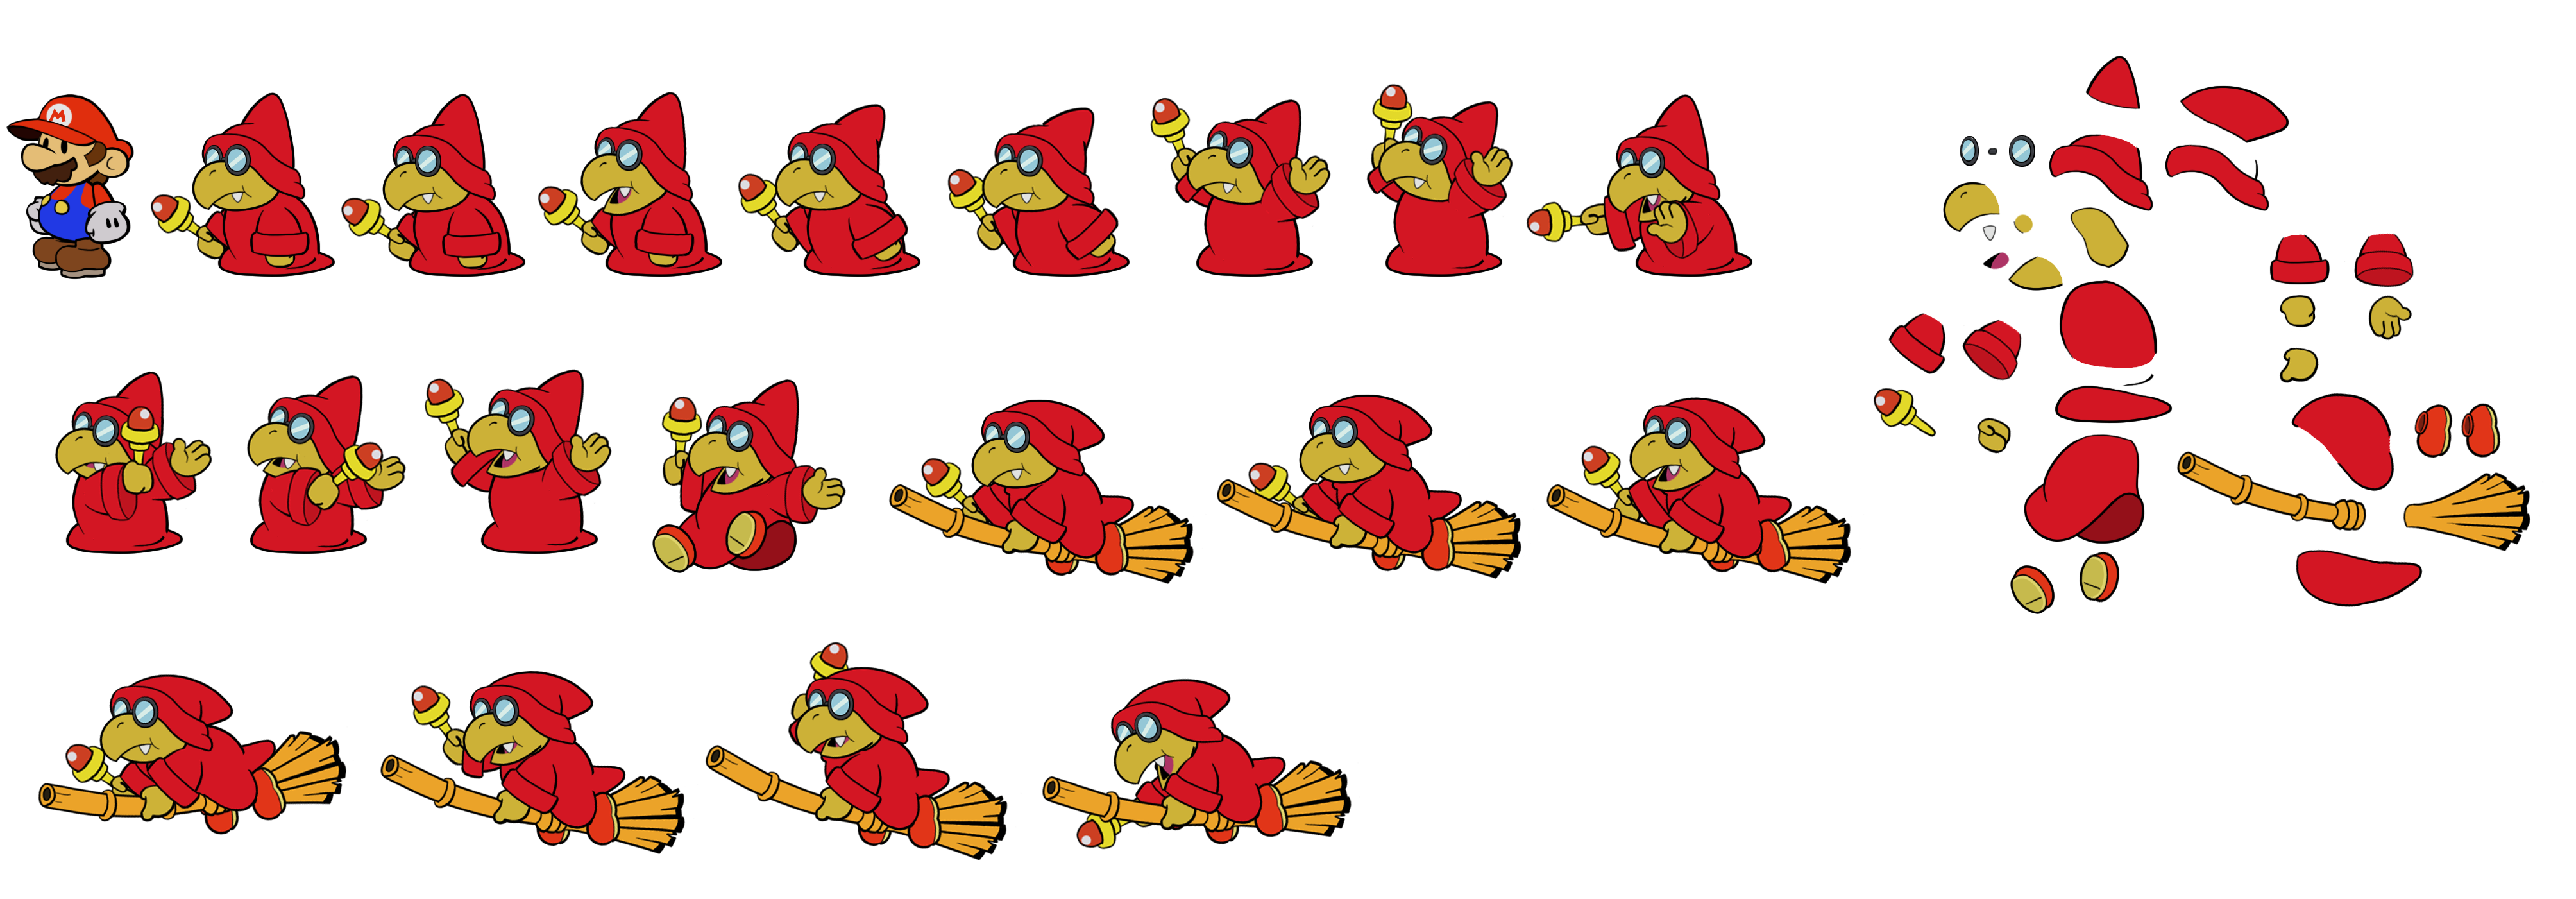 Magikoopa (Red, Paper Mario-Style)